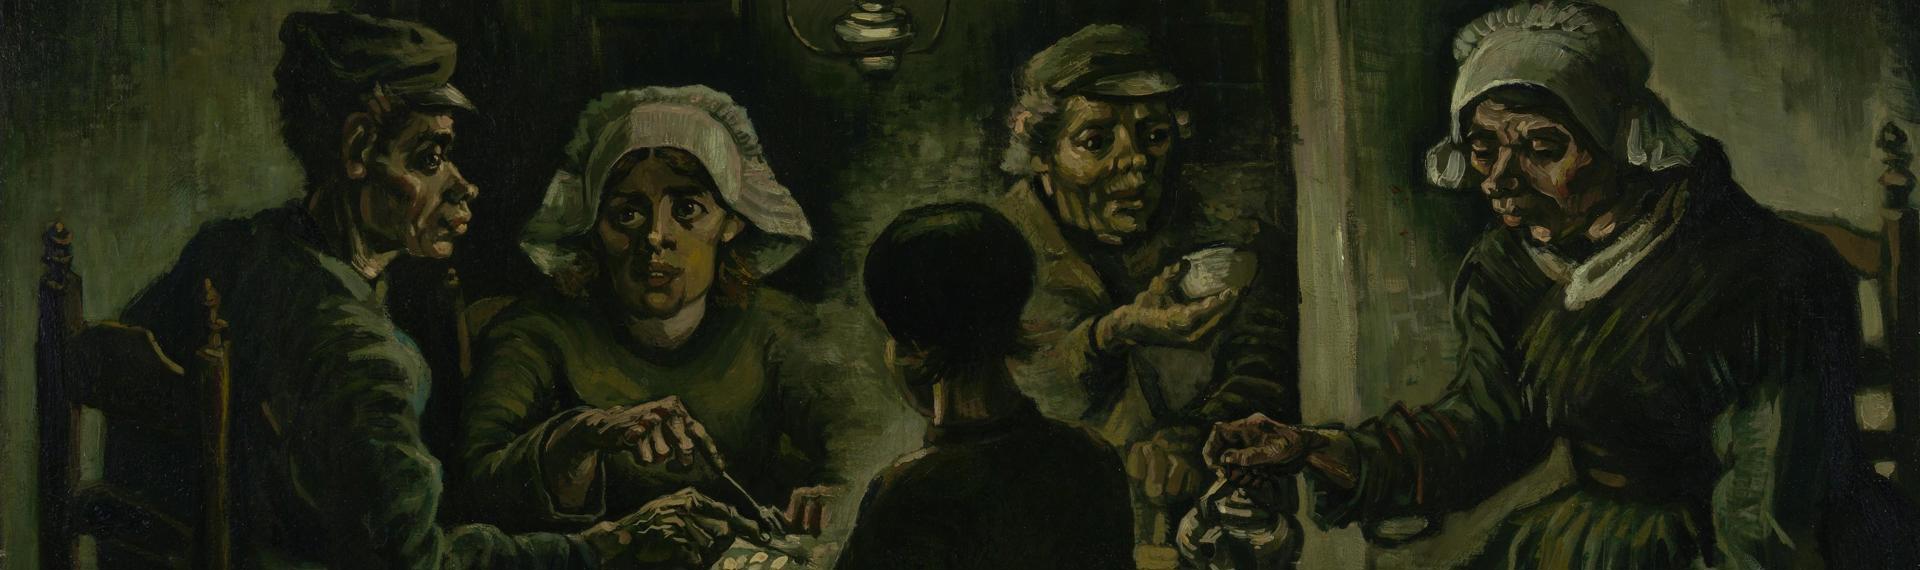 'The potato eaters' is a well-known work by Vincent van Gogh